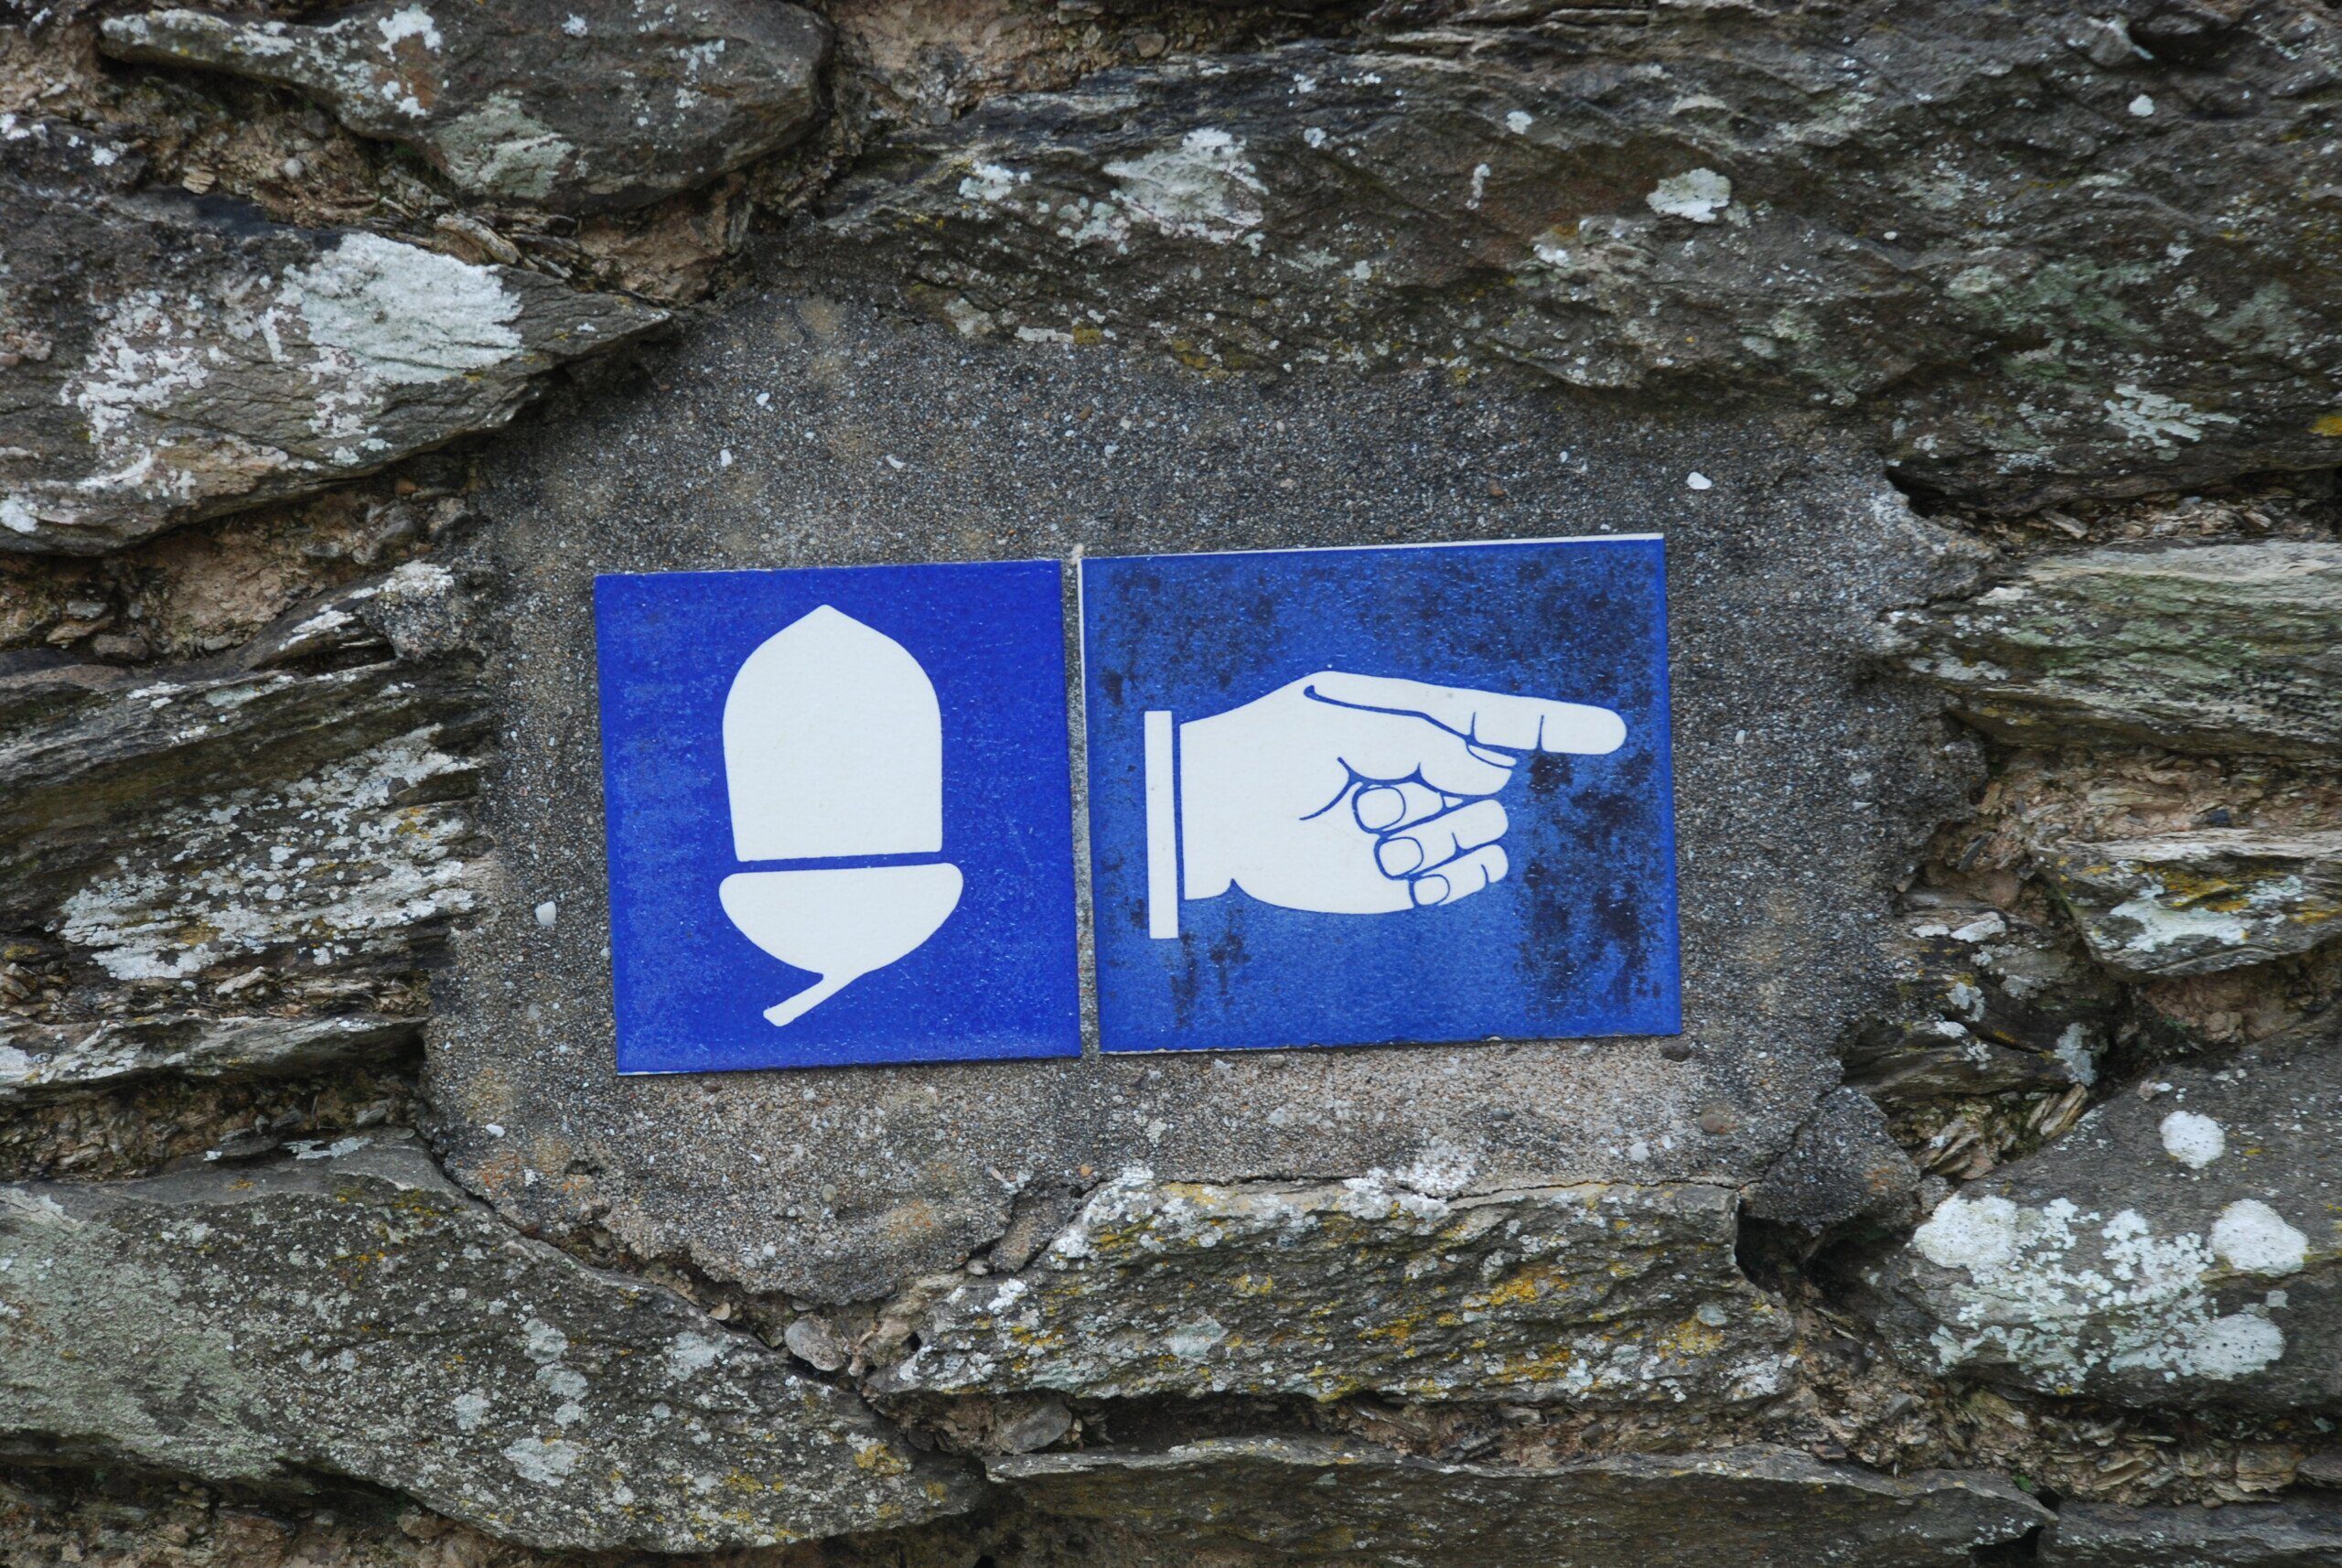 Blue ceramic National Trail sign, with acorn and hand pointing the way